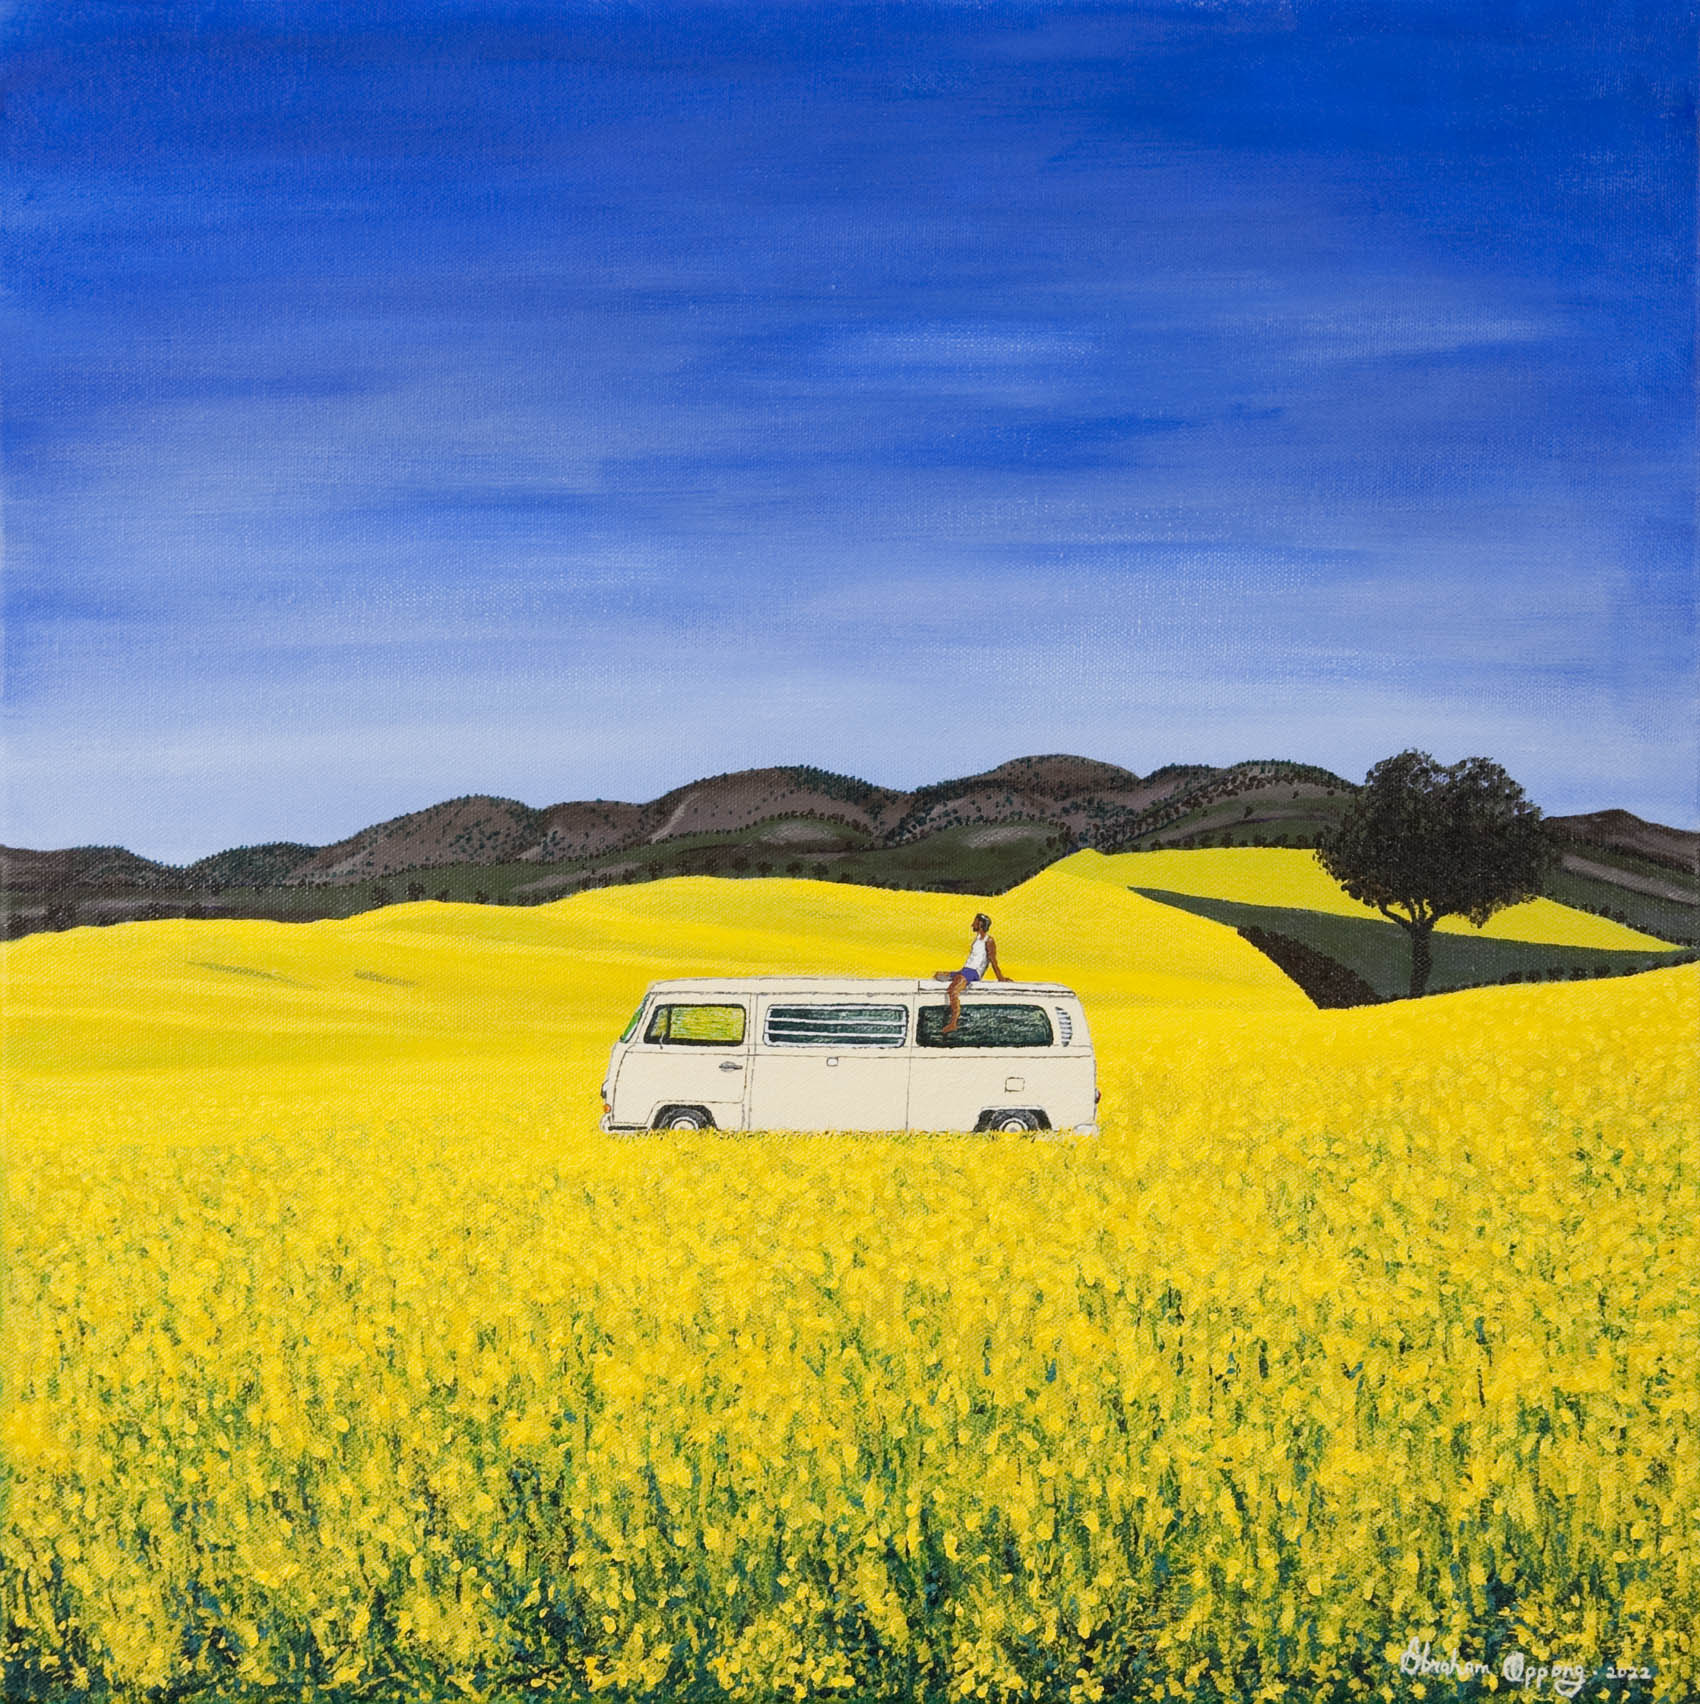 Original painting of a man sitting on the roof of a white campervan on a sunny day of blue skies in yellow flower field landscape with trees and hills in the background.